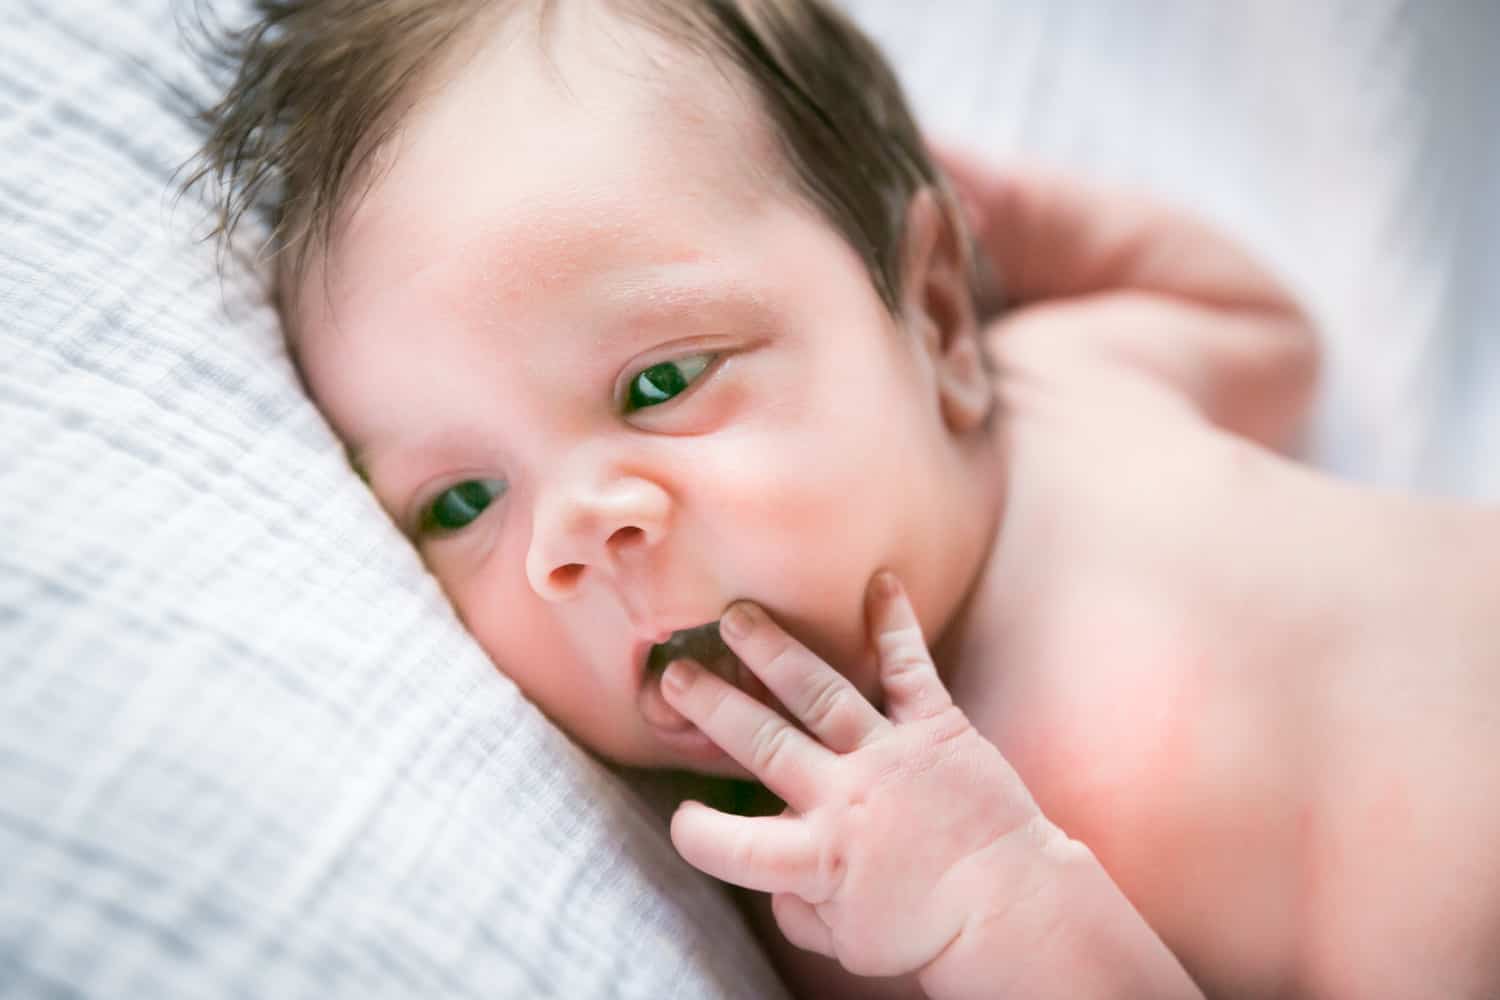 Newborn baby on white blanket with hands in mouth